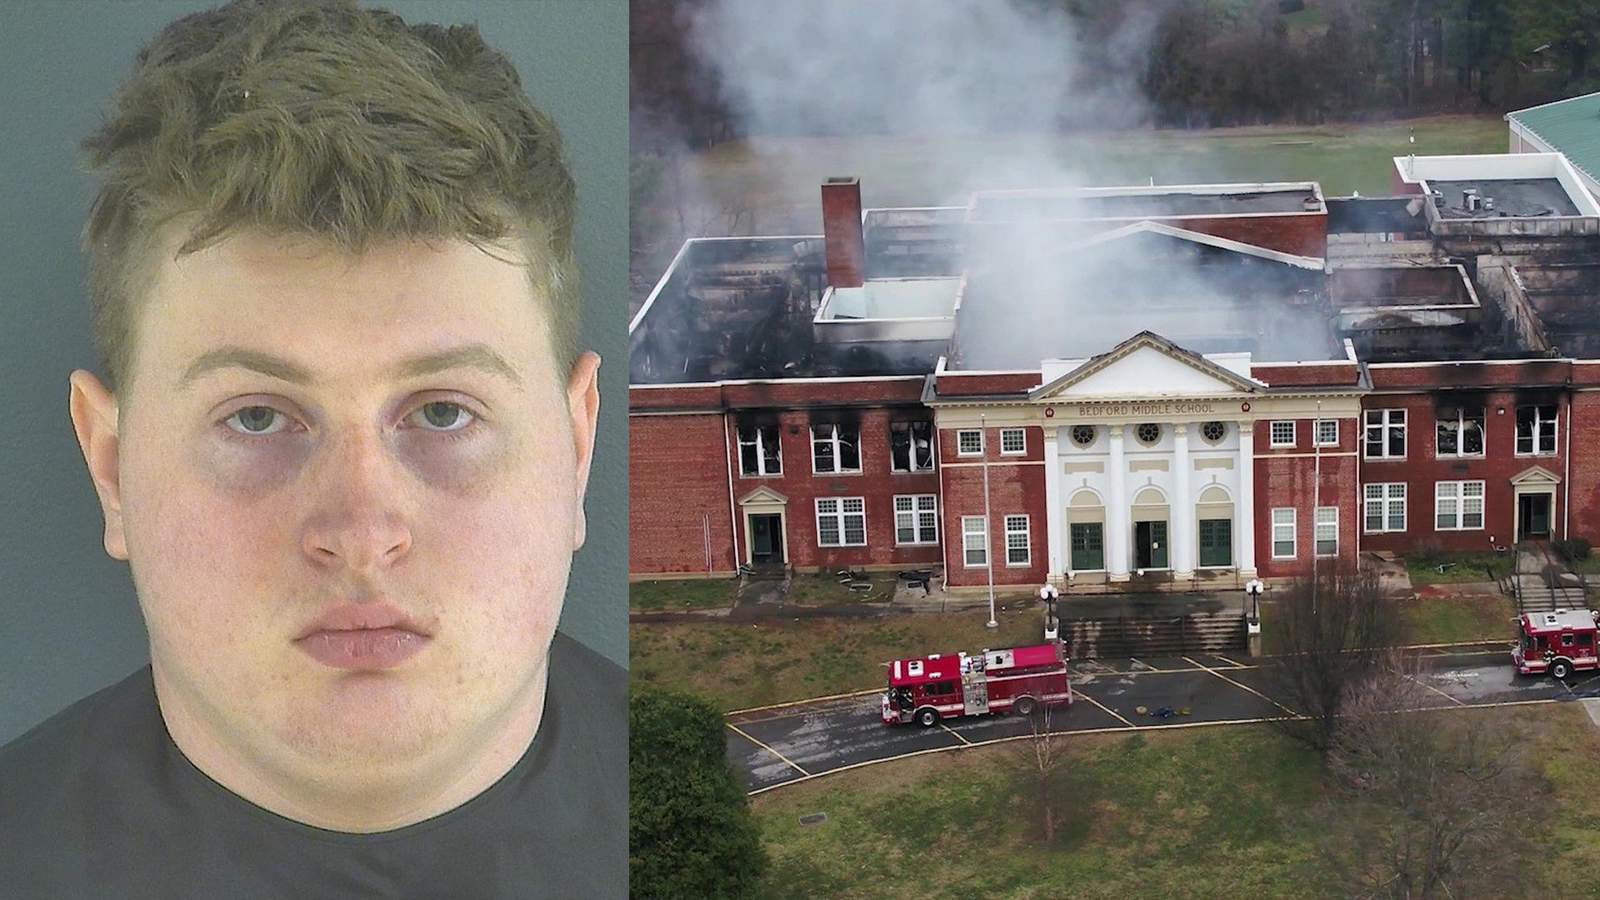 Man facing felony charges for Bedford Middle School fire to enter plea agreement